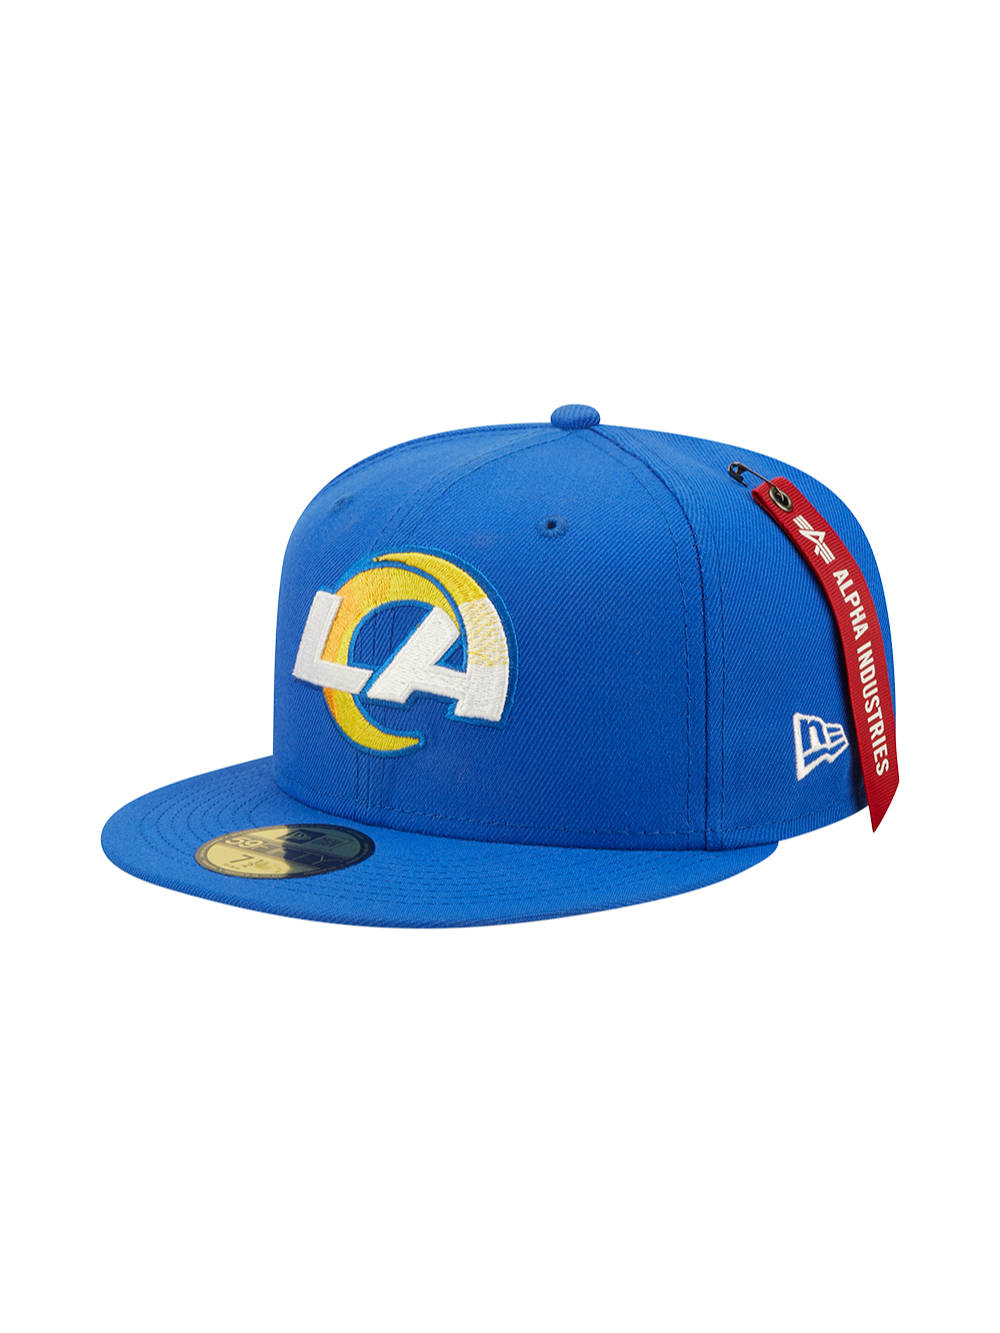 Alpha Industries x Los Angeles Rams 59FIFTY Fitted Hat, Blue - Size: 7 3/4, NFL by New Era